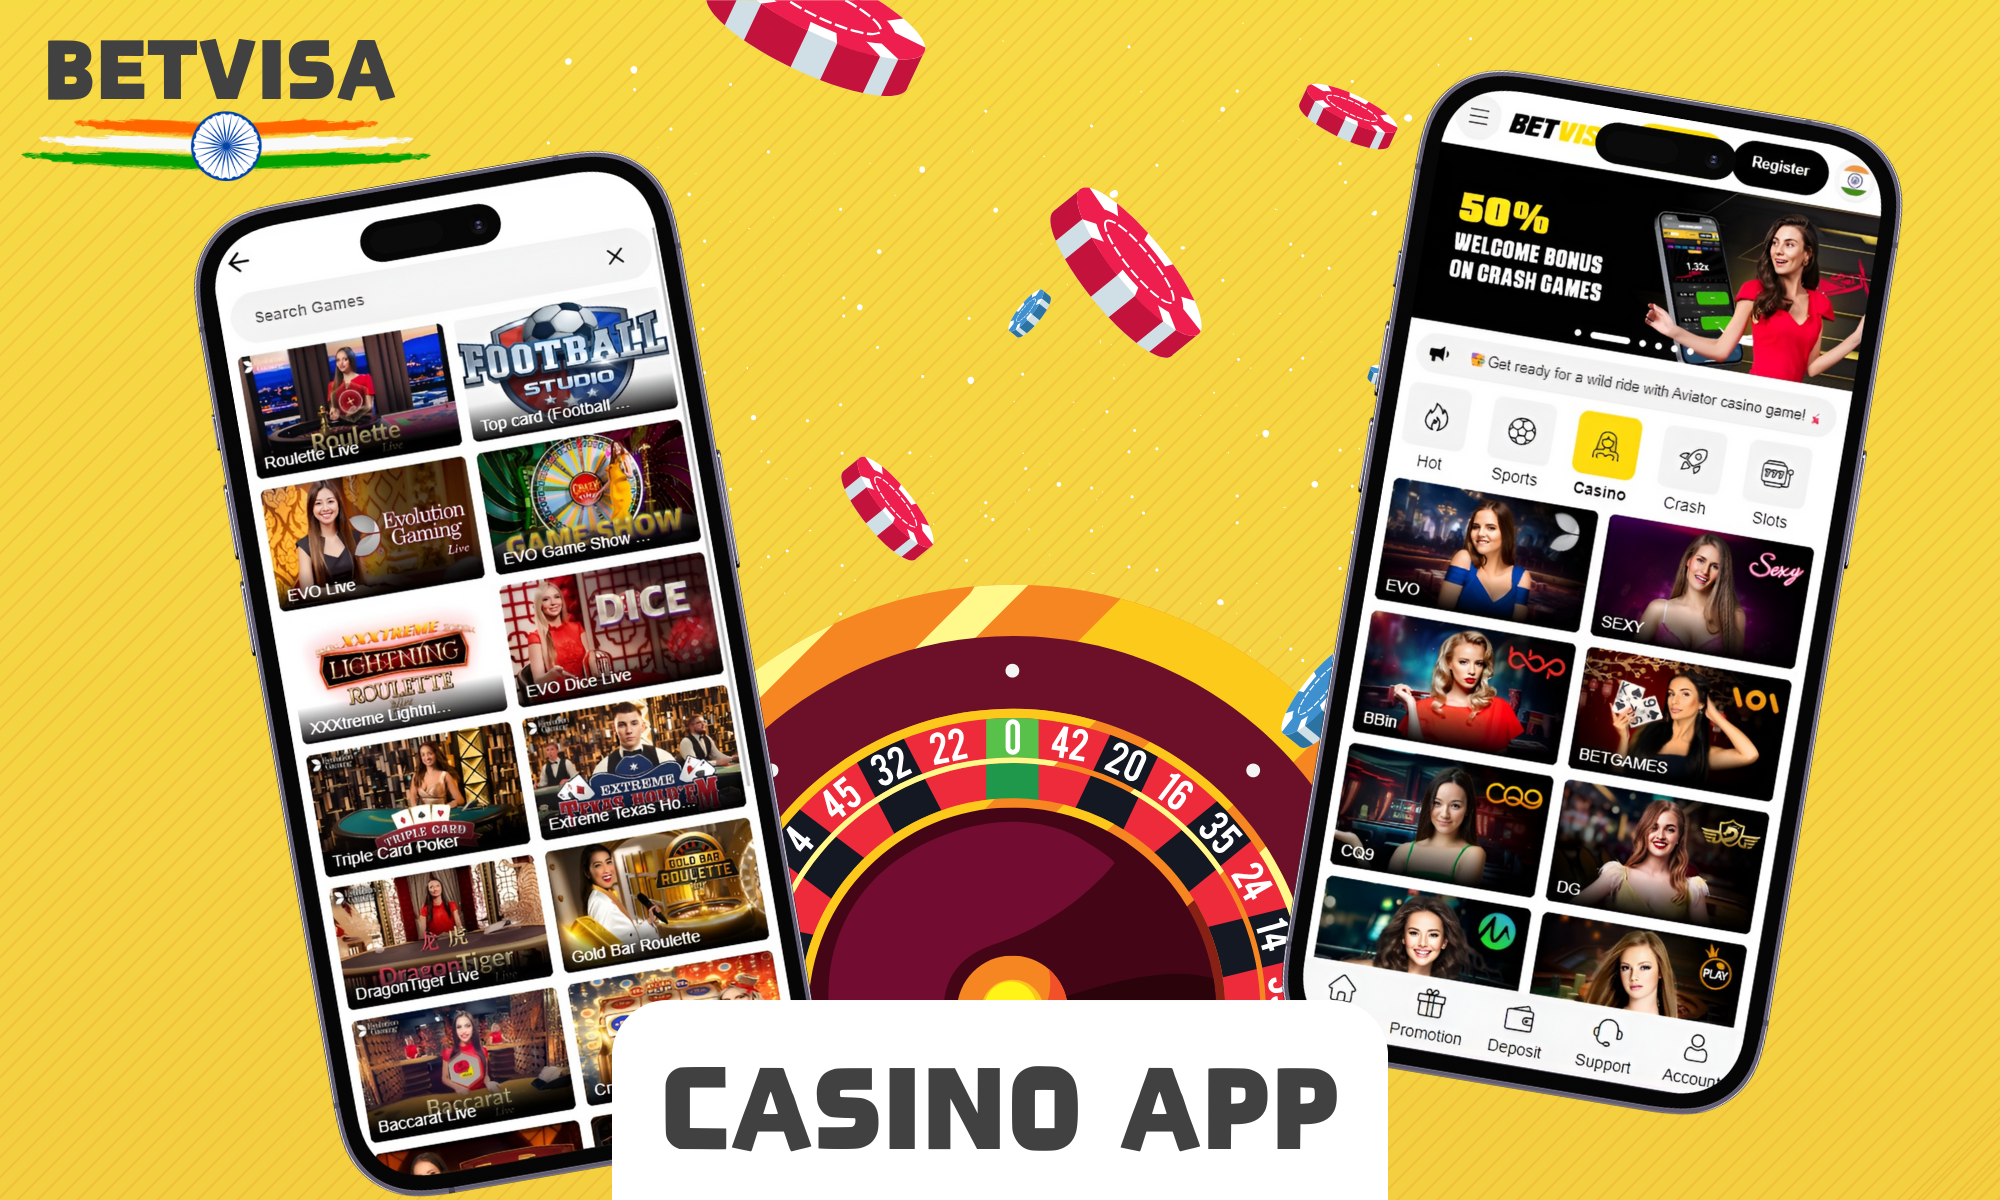 The Betvisa app offers a wide range of games and online casinos